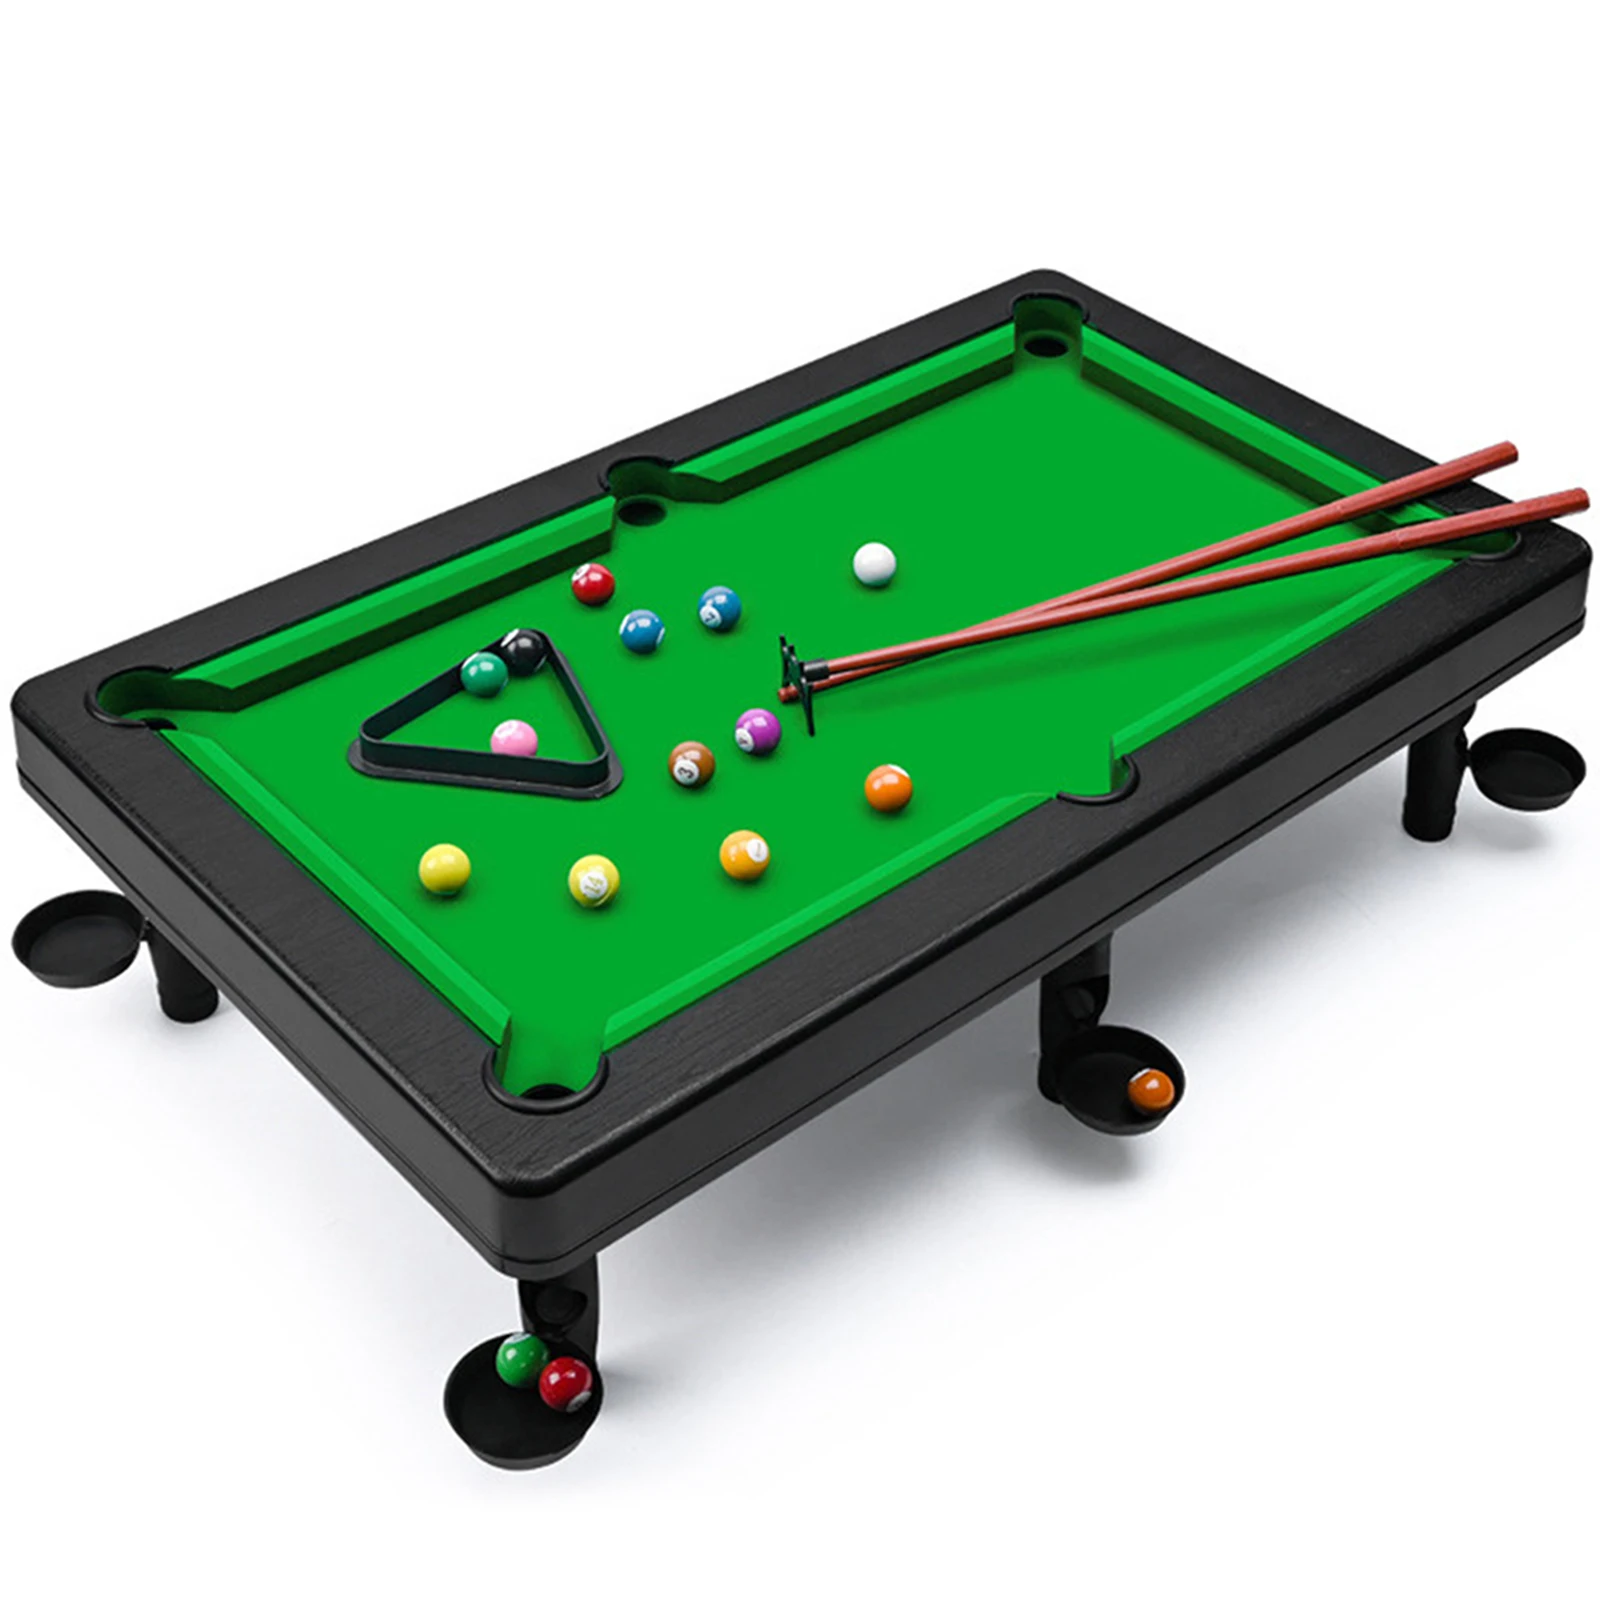 For Kids Adults Ball Table Pool Table Indoor Games For Stress Relief Stability 1sets Burr-free Full-sized Plastic Round